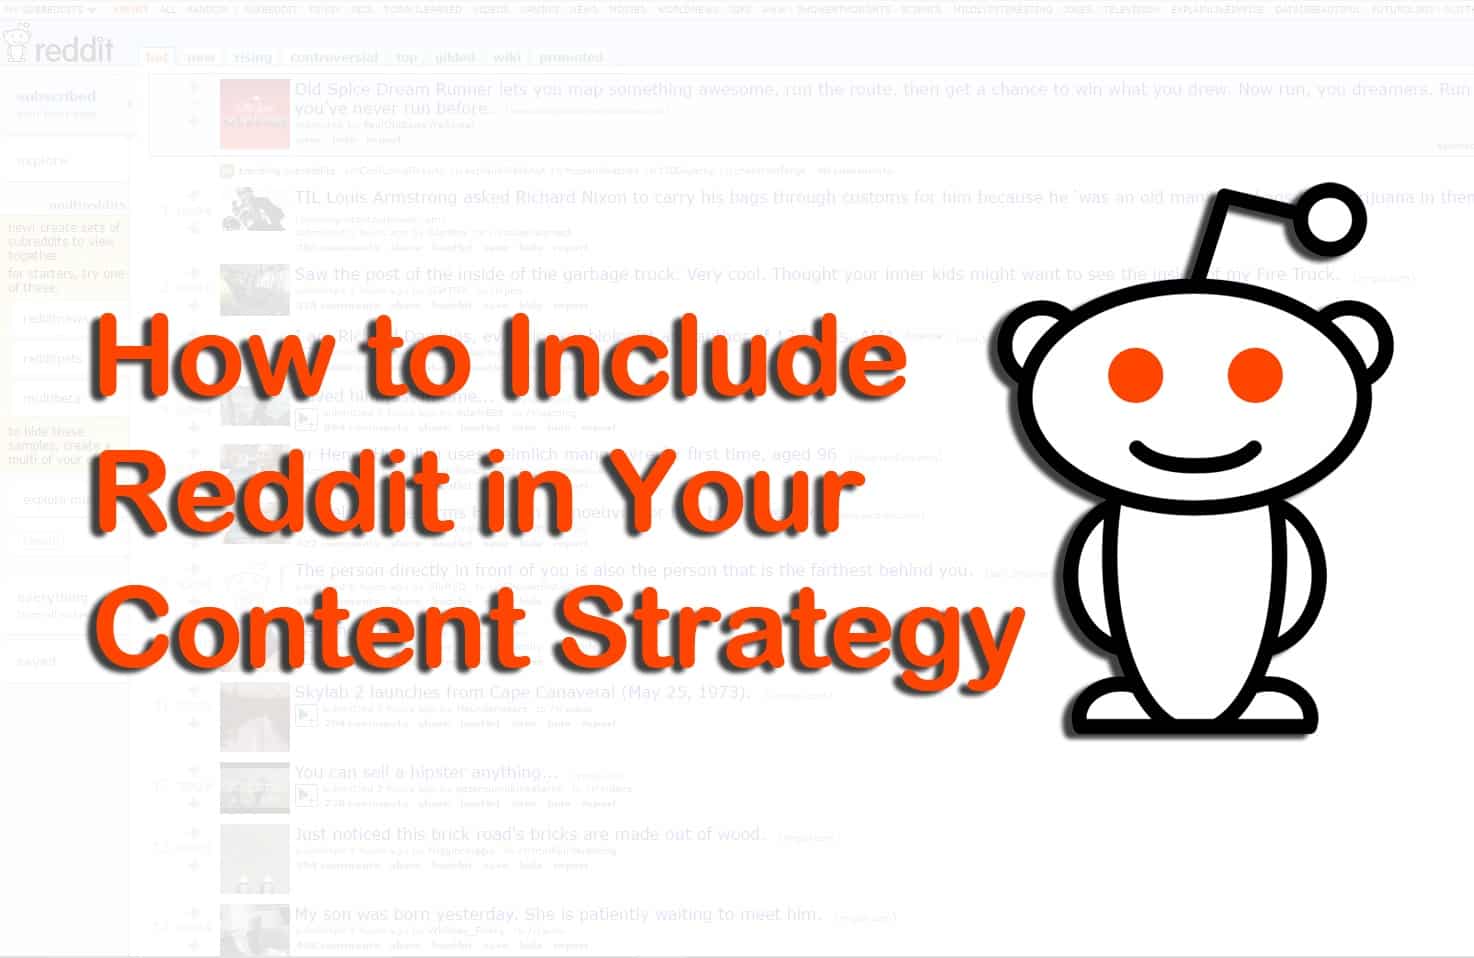 Reddit Content Strategy